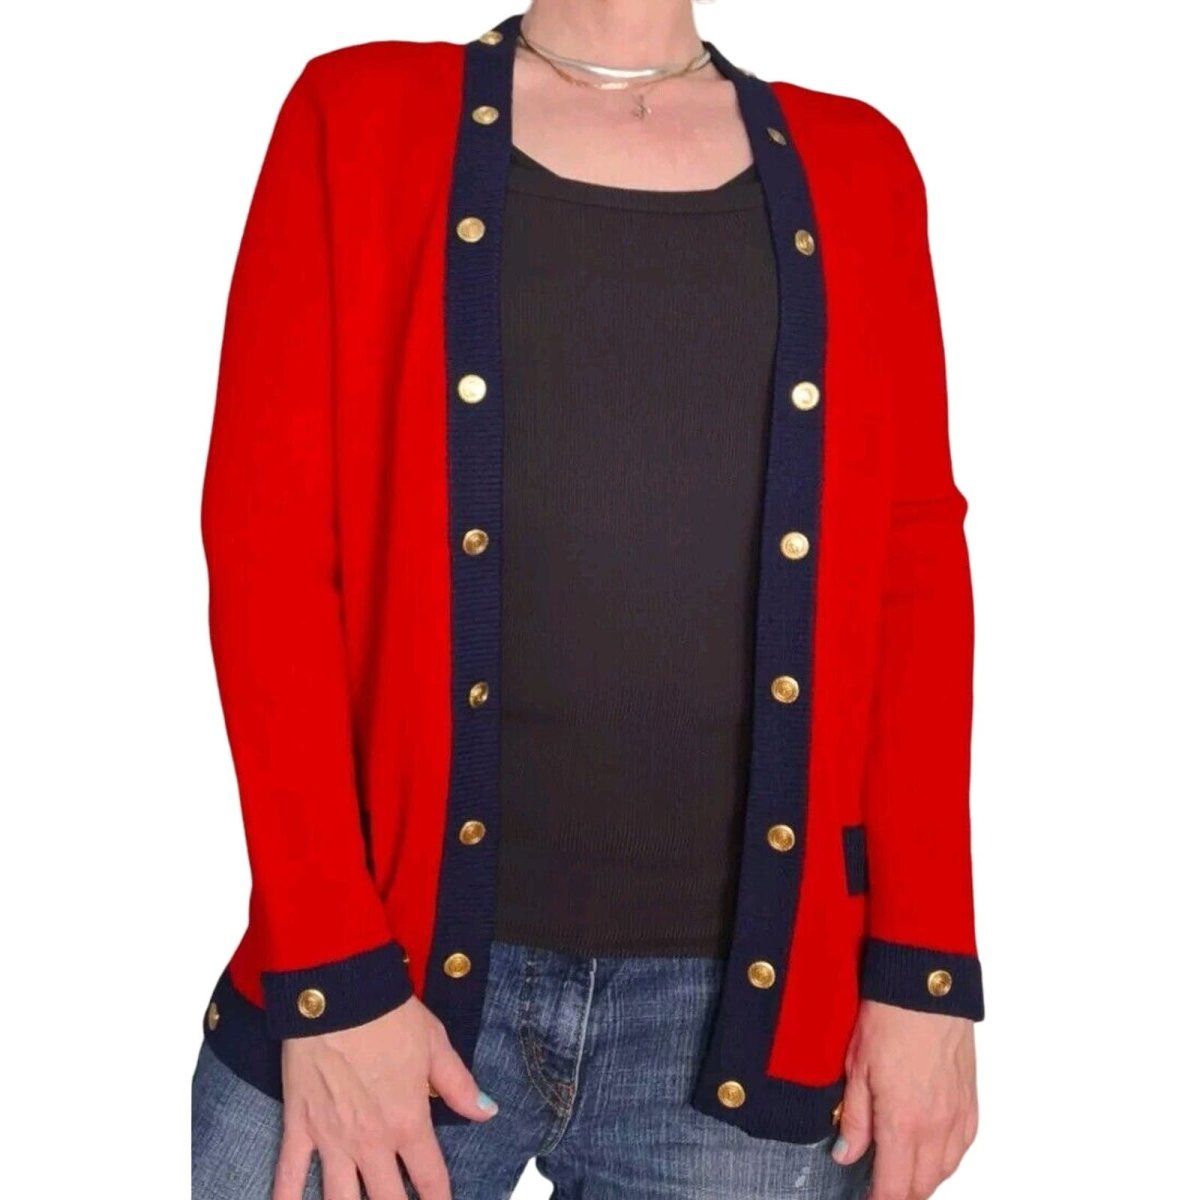 Vintage 90s Red/Navy Open Front Nautical Cardigan Sweater Women Size 6 Medium - themallvintage The Mall Vintage